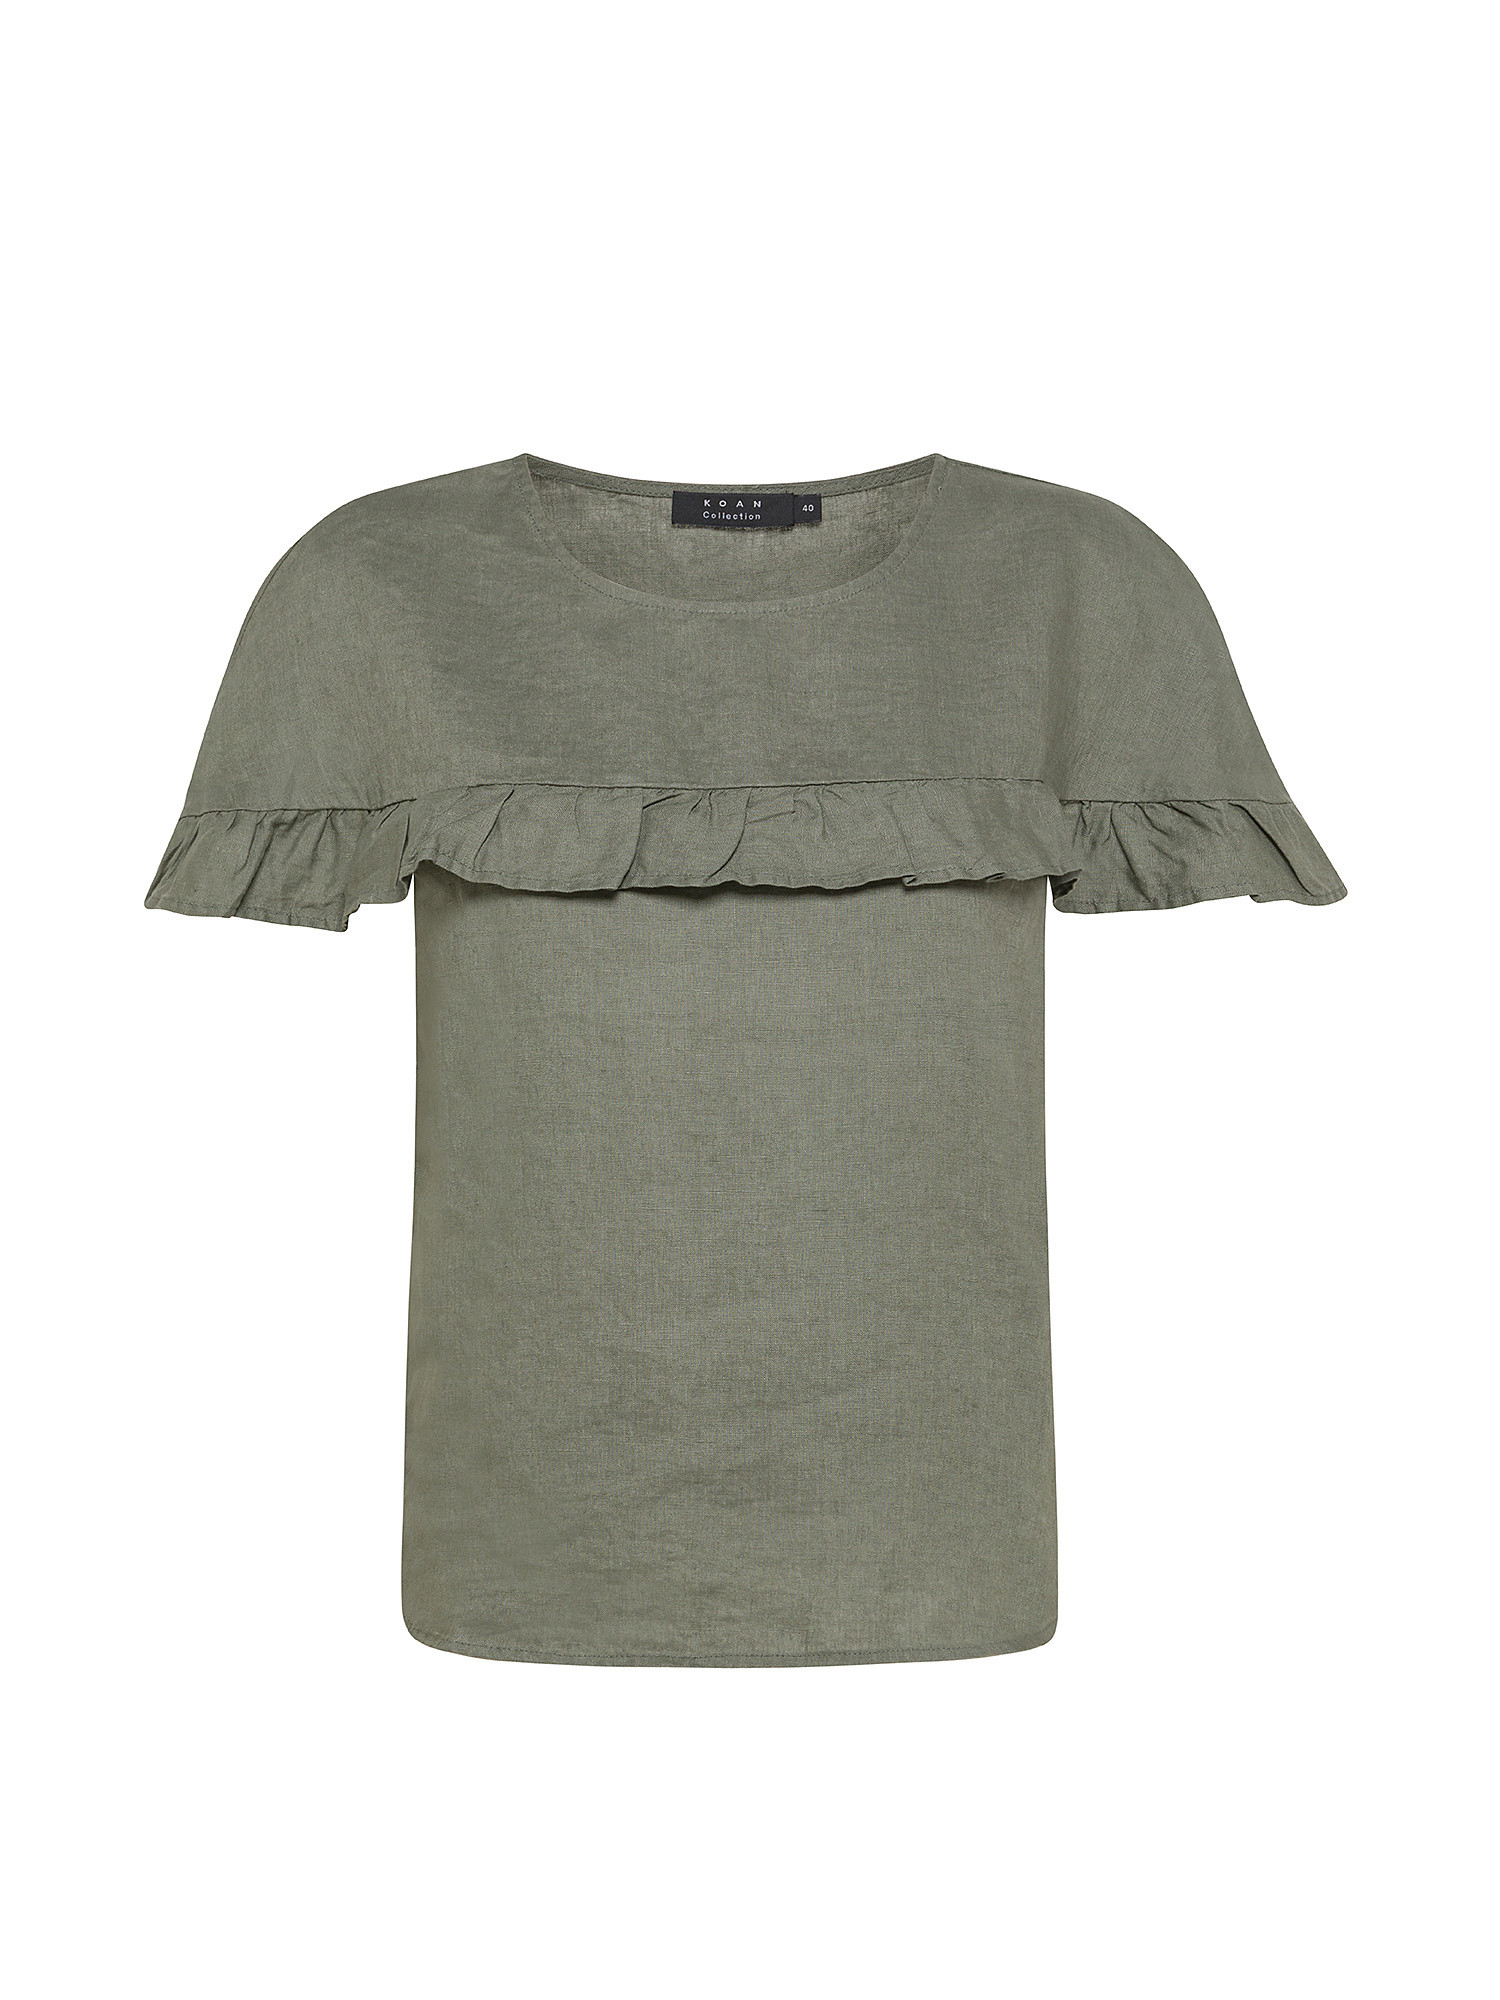 Koan - Linen blouse with ruffles, Sage Green, large image number 0